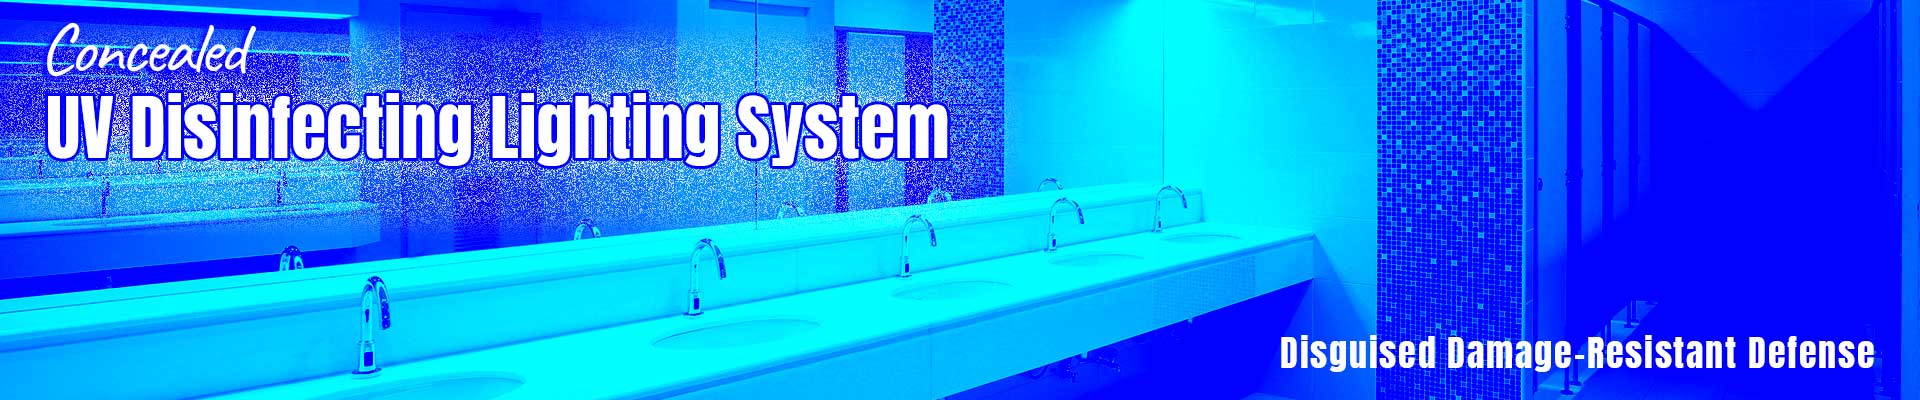 Concealed UV Disinfecting Lighting System Installed